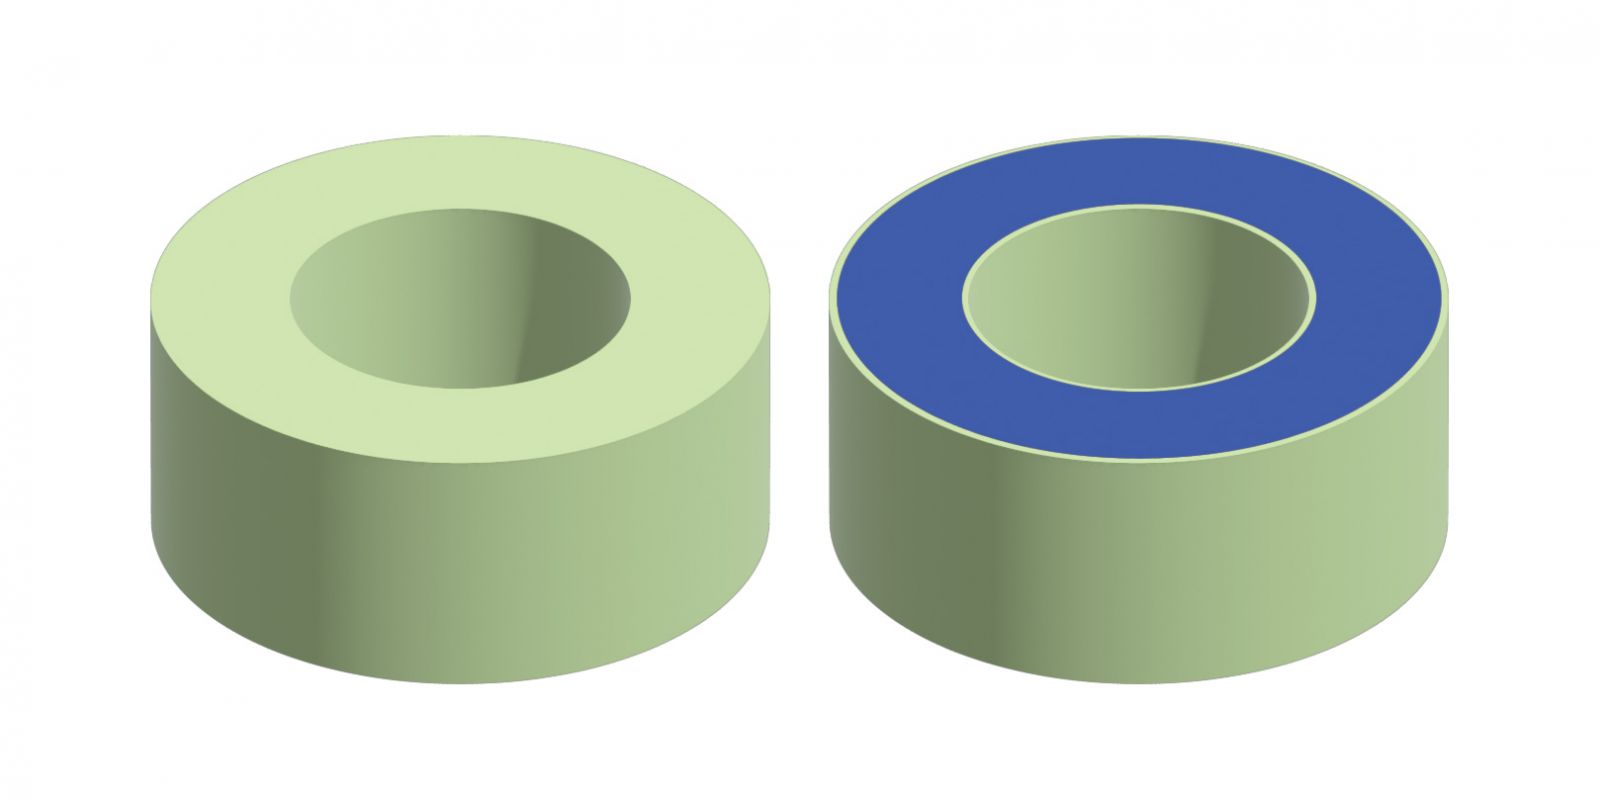 52 material-GOTREND Article-What does the color of the inductor ring mean? High conductivity ring